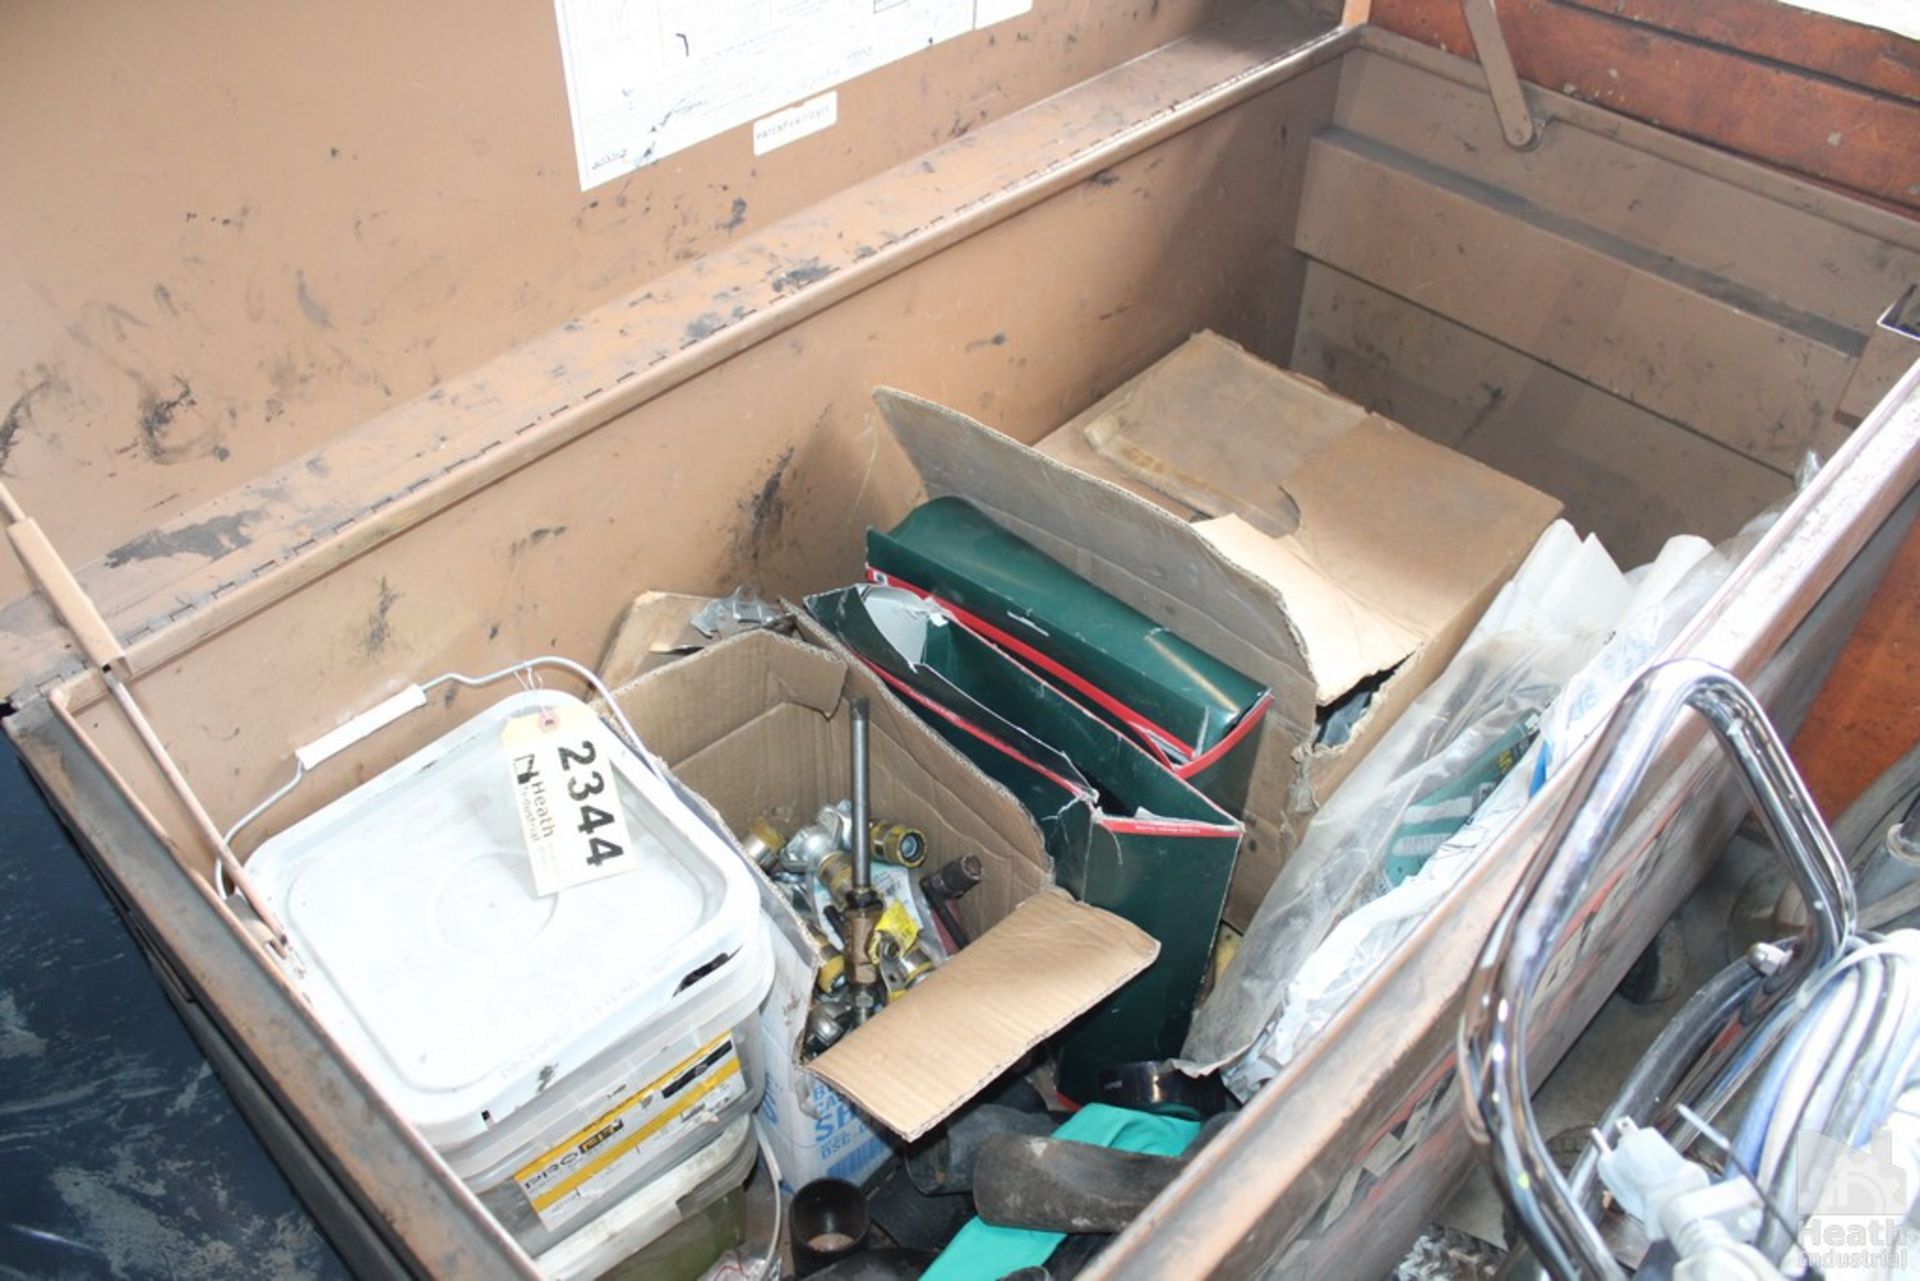 CONTENTS OF JOB BOX INCLUDING NAILS, VALVES AND CAULK TAPE